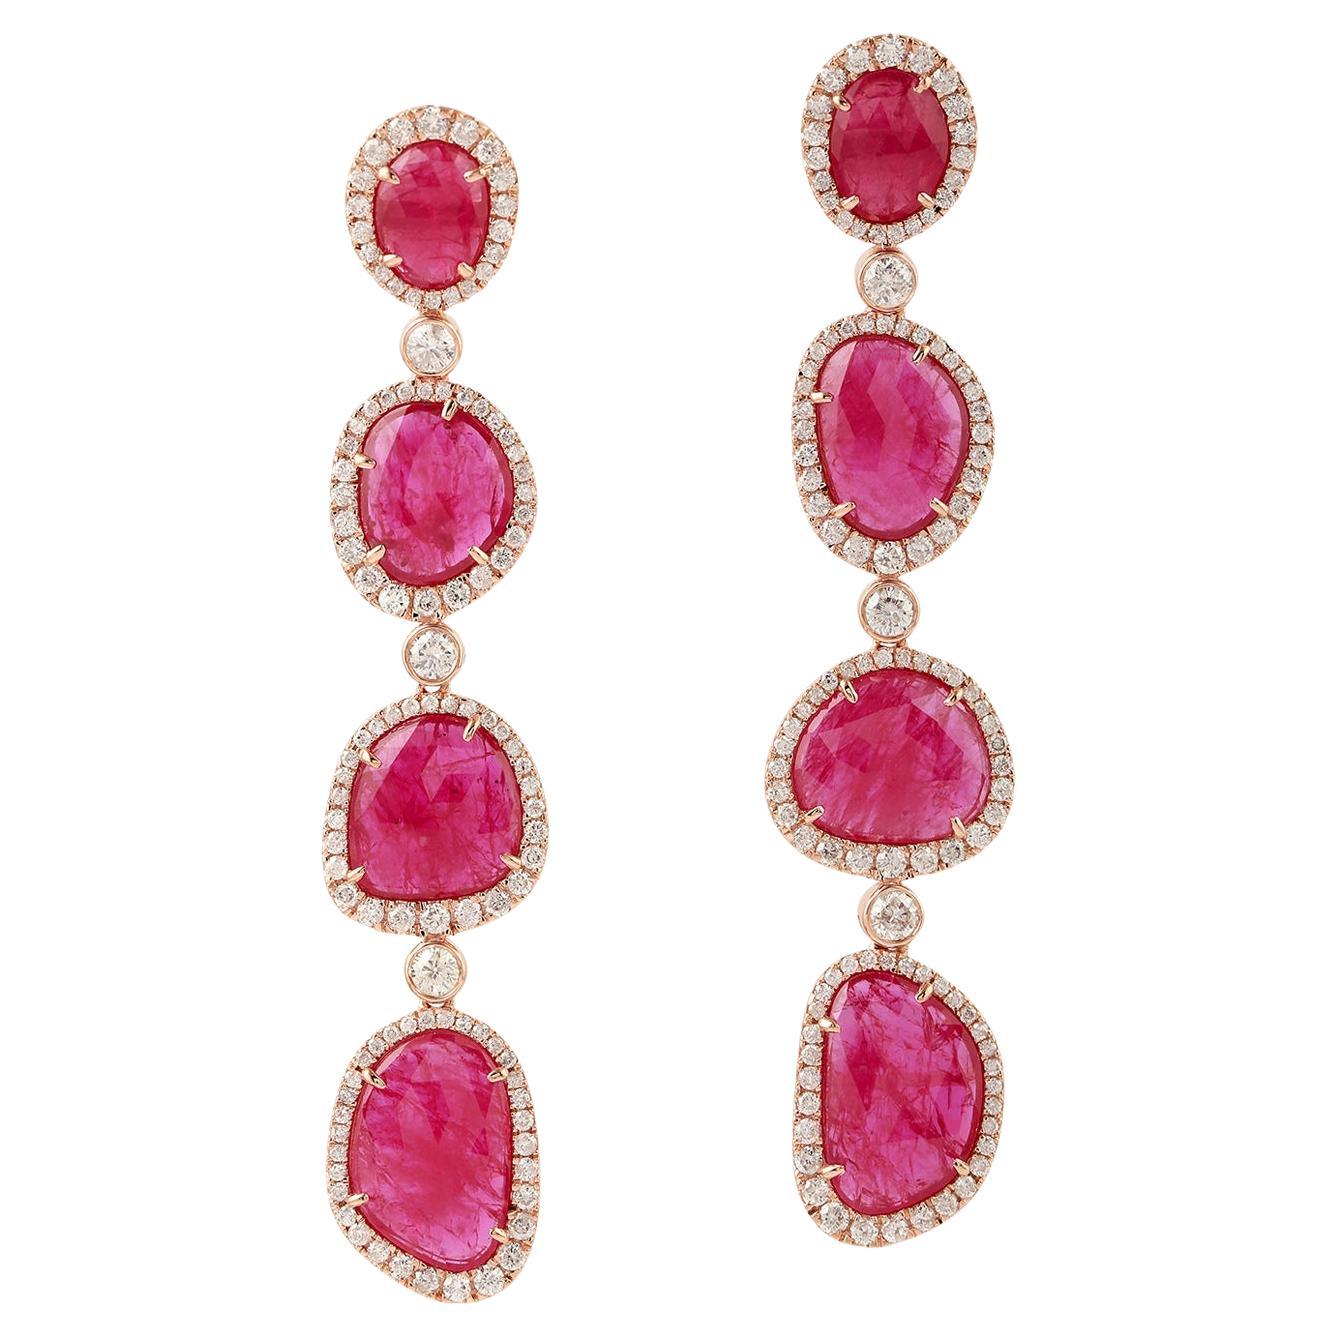 Multi Tier Mosambic Ruby Dangle Earrings With Diamonds Made In 18k Rose Gold For Sale